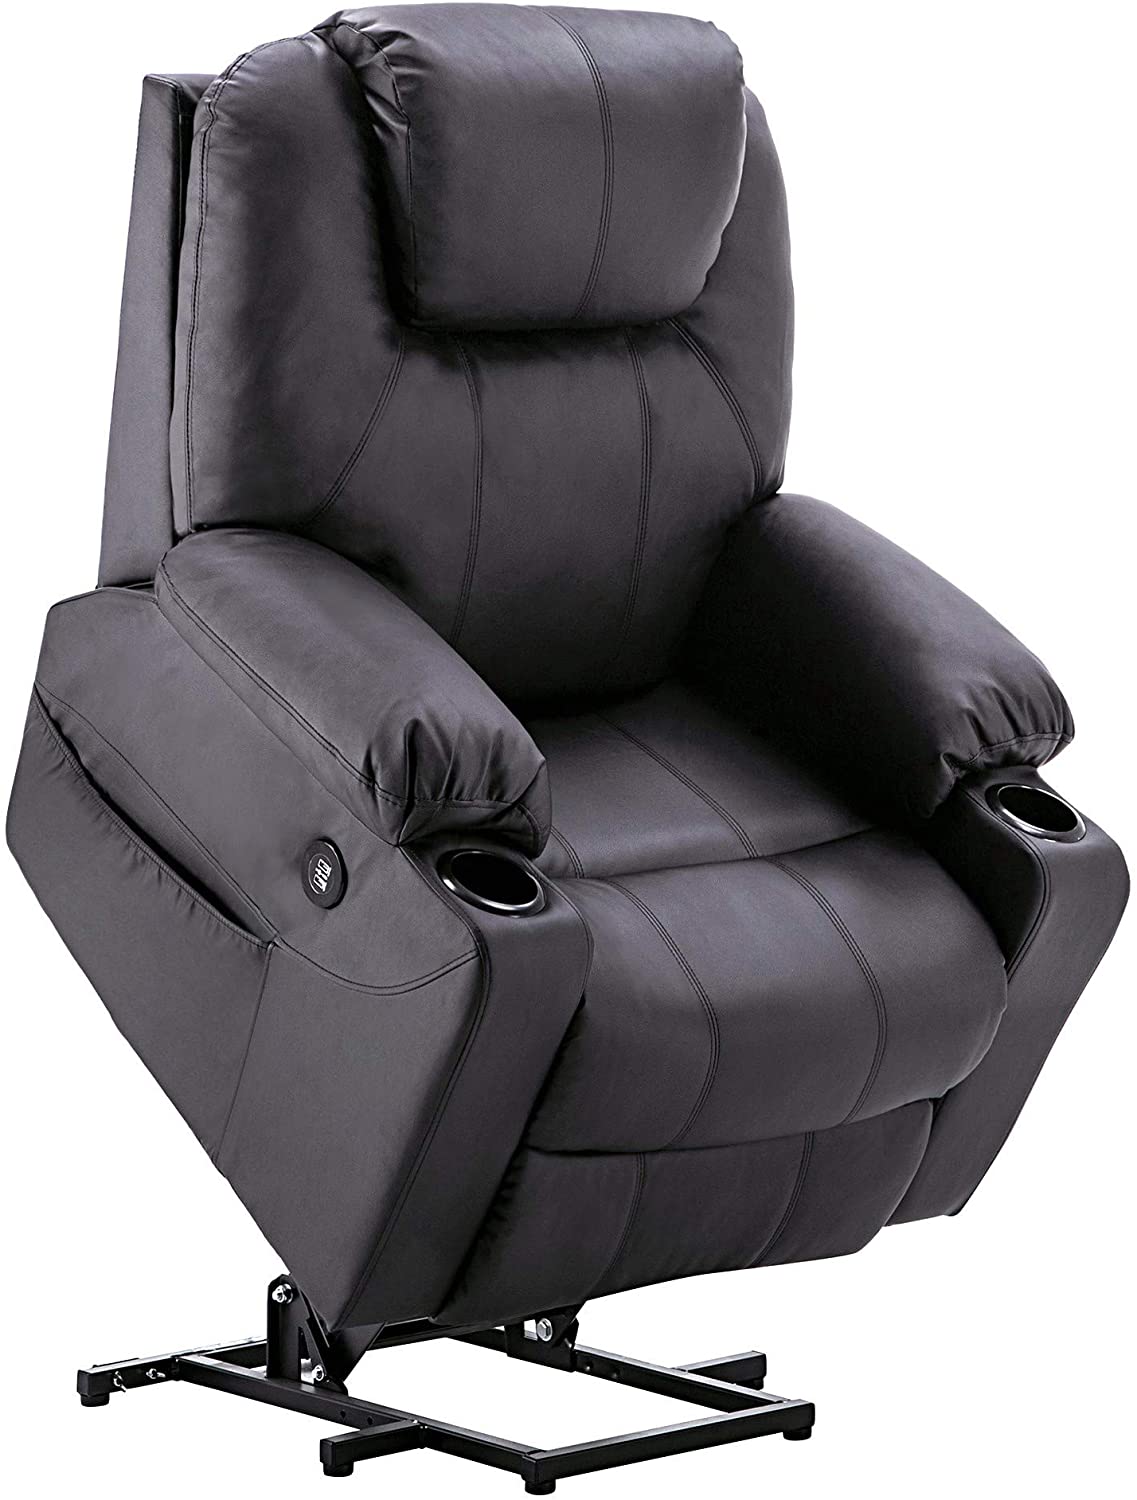 Mcombo Electric Power Lift Recliner Chair (Black)